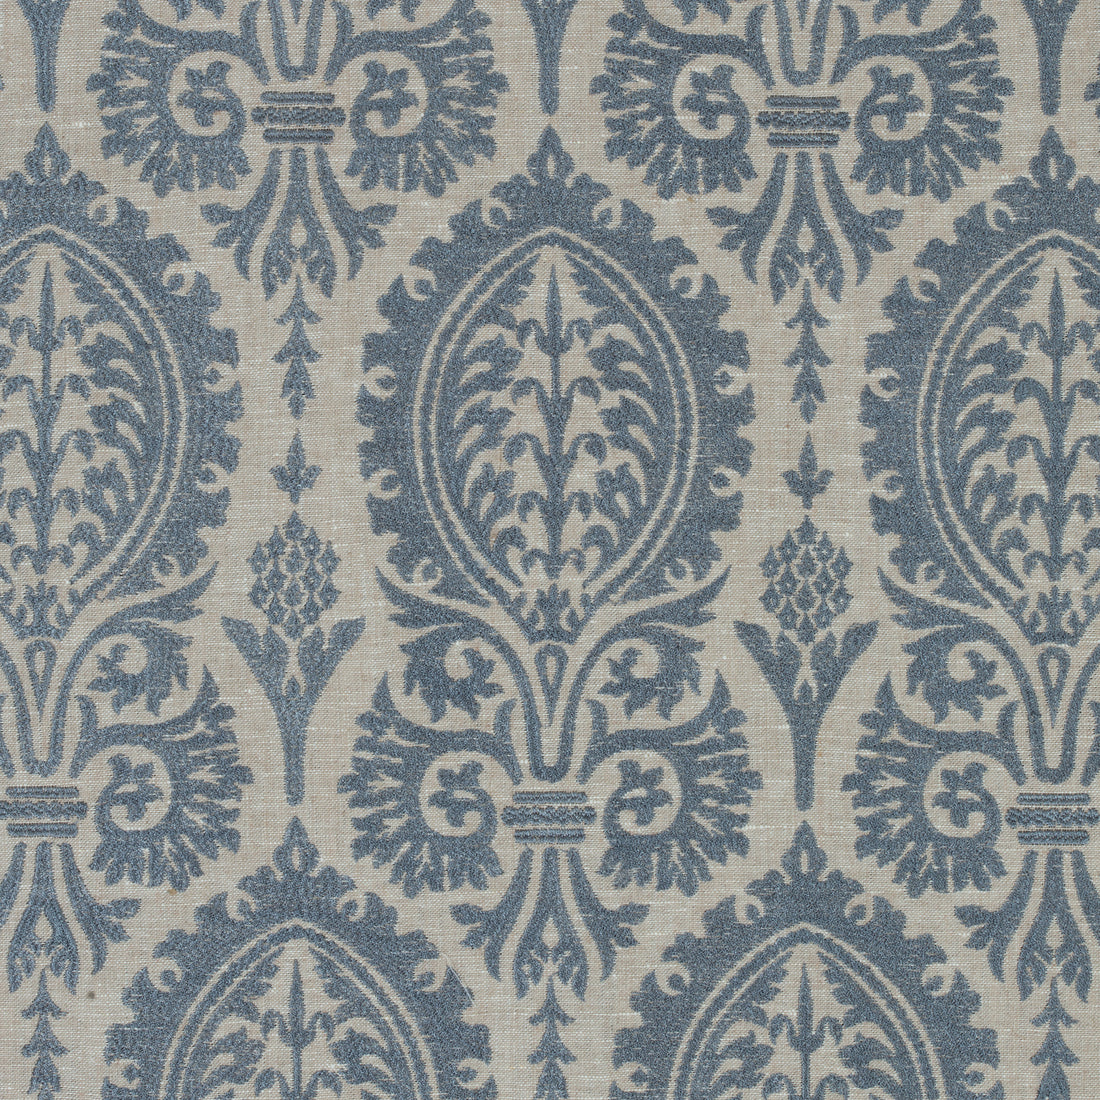 Sir Thomas Embroidery fabric in slate blue color - pattern number W772571 - by Thibaut in the Chestnut Hill collection